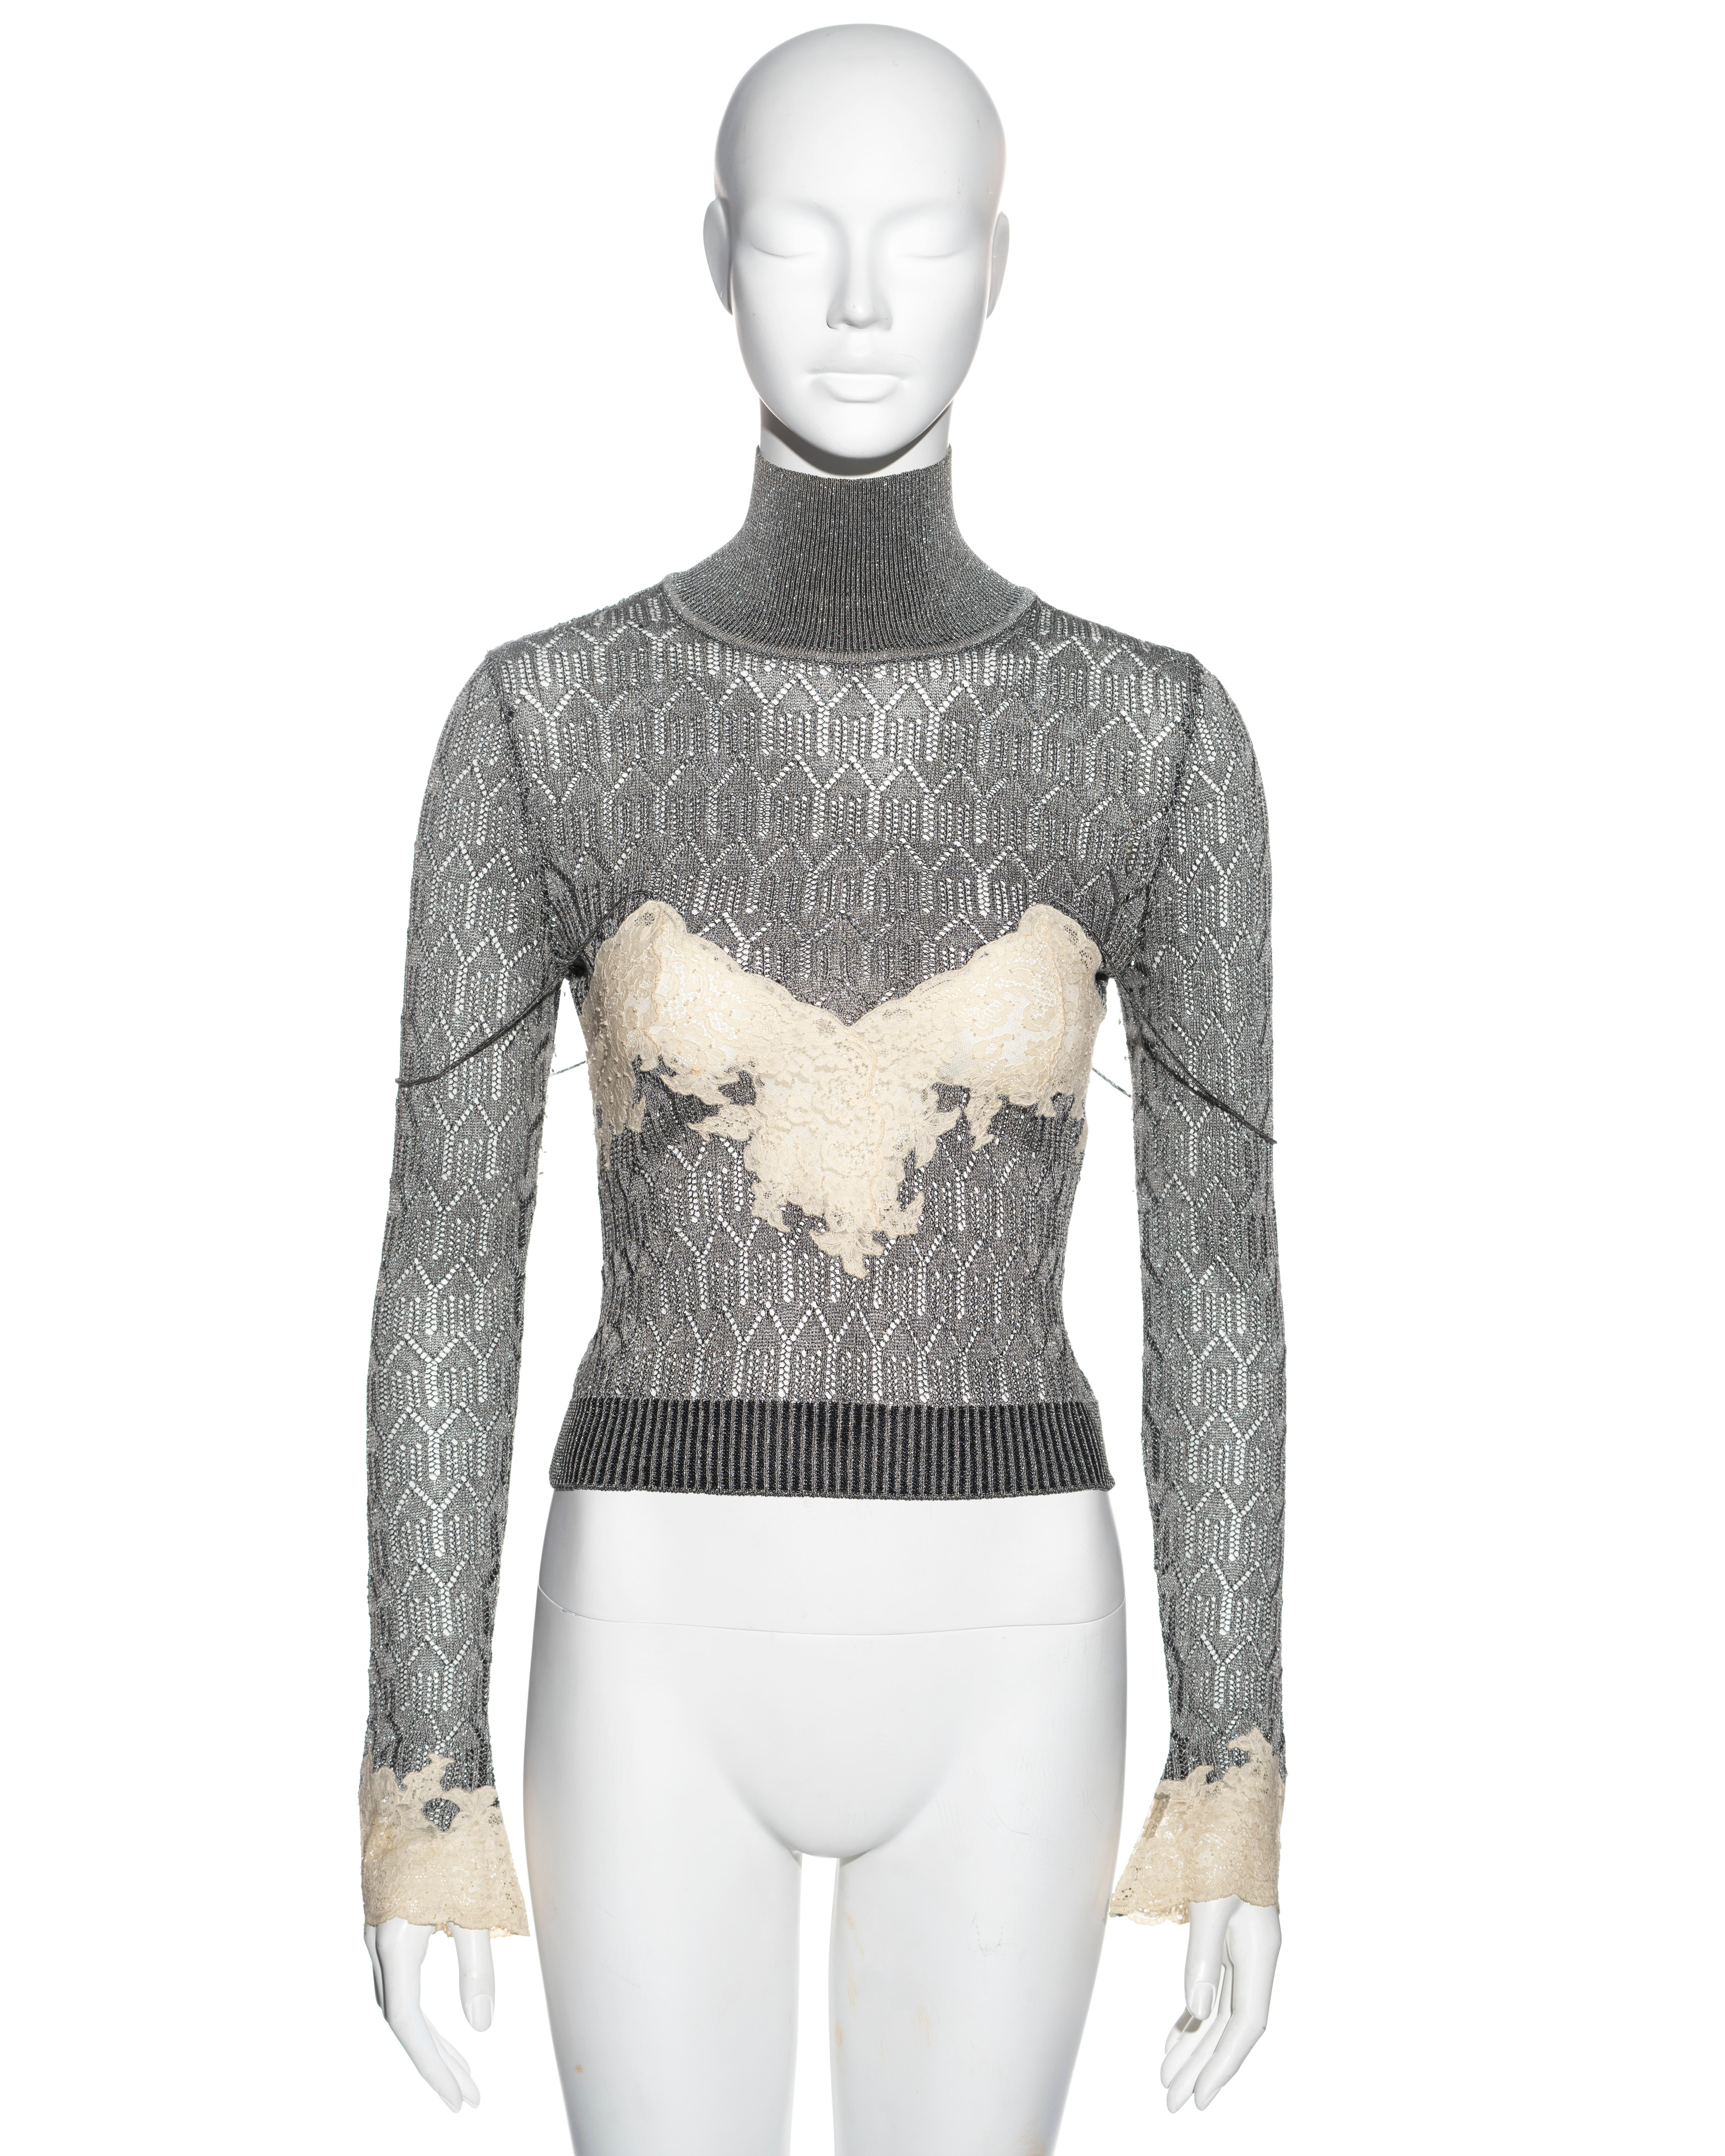 ▪ Christian Dior sweater
▪ Sold by One of a Kind Archive
▪ Constructed from silver foiled knitted viscose 
▪ Cream Chantilly lace inserts 
▪ Turtle neck 
▪ Spaghetti straps 
▪ Size Small
▪ Fall-Winter 1998
▪ Made in France

All photographs in this